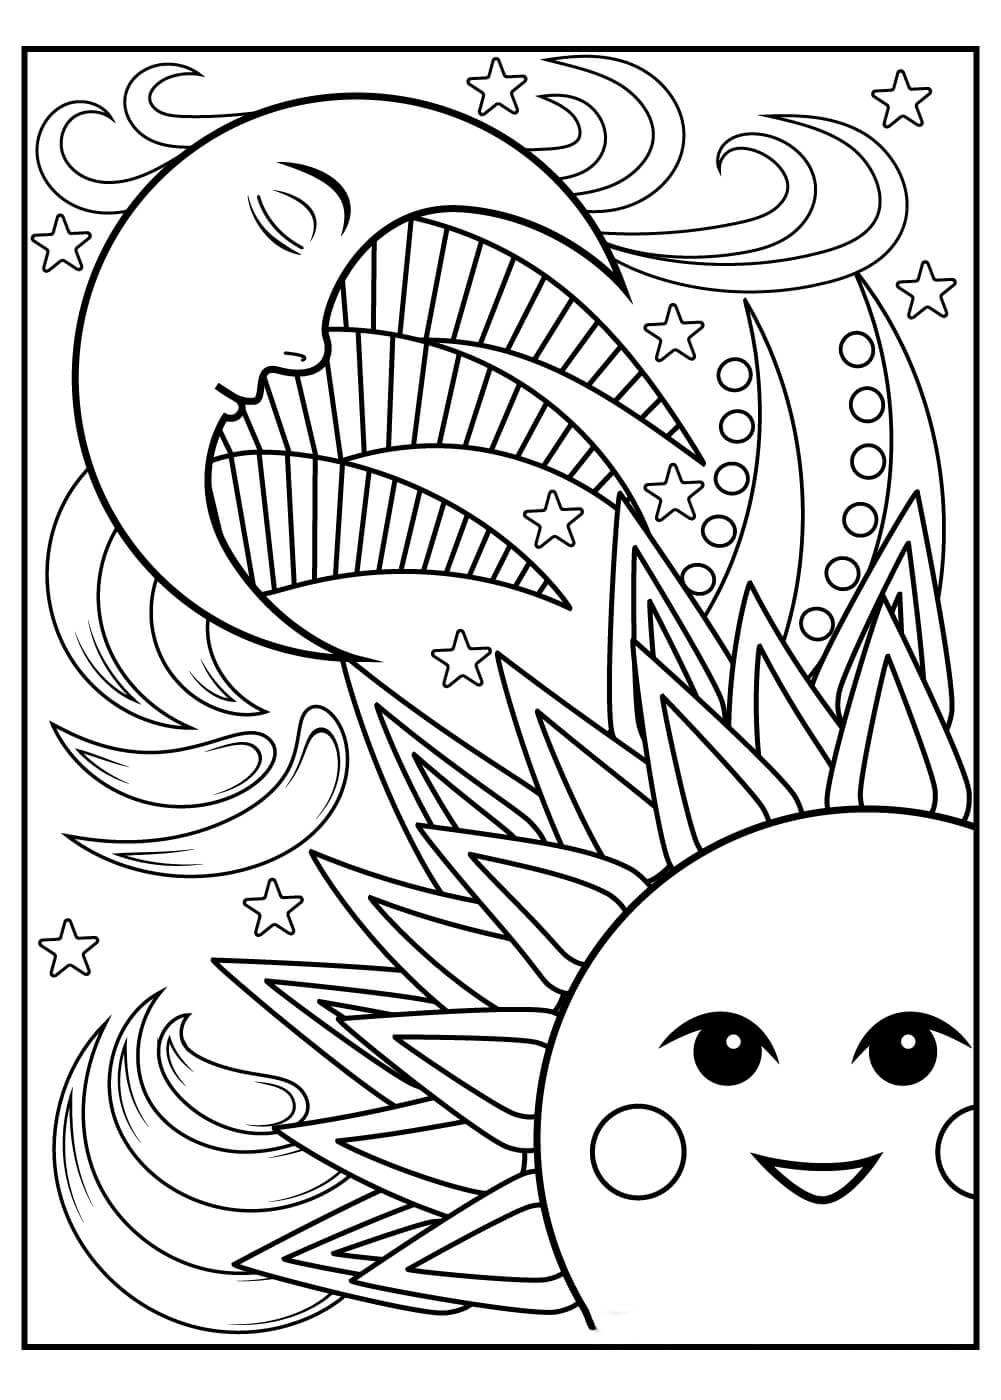 Fun Sun And Moon Coloring Page Download Print Or Color Online For Free